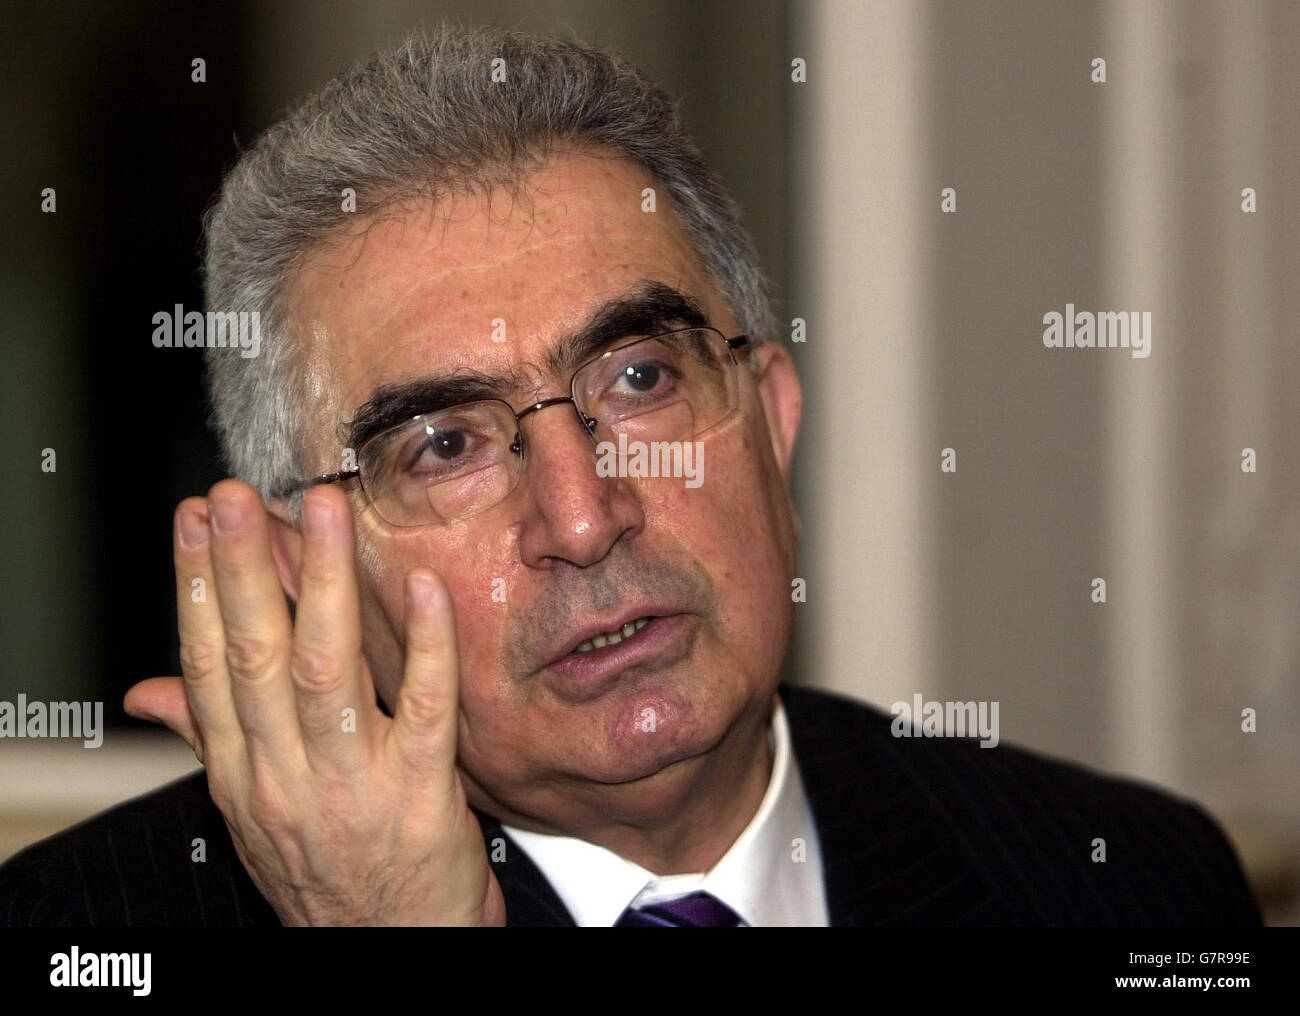 Dr Salah al Shaikhly, Iraqi Ambassador to London, discusses politics in the aftermath of the parliamentary elections in Iraq. Stock Photo